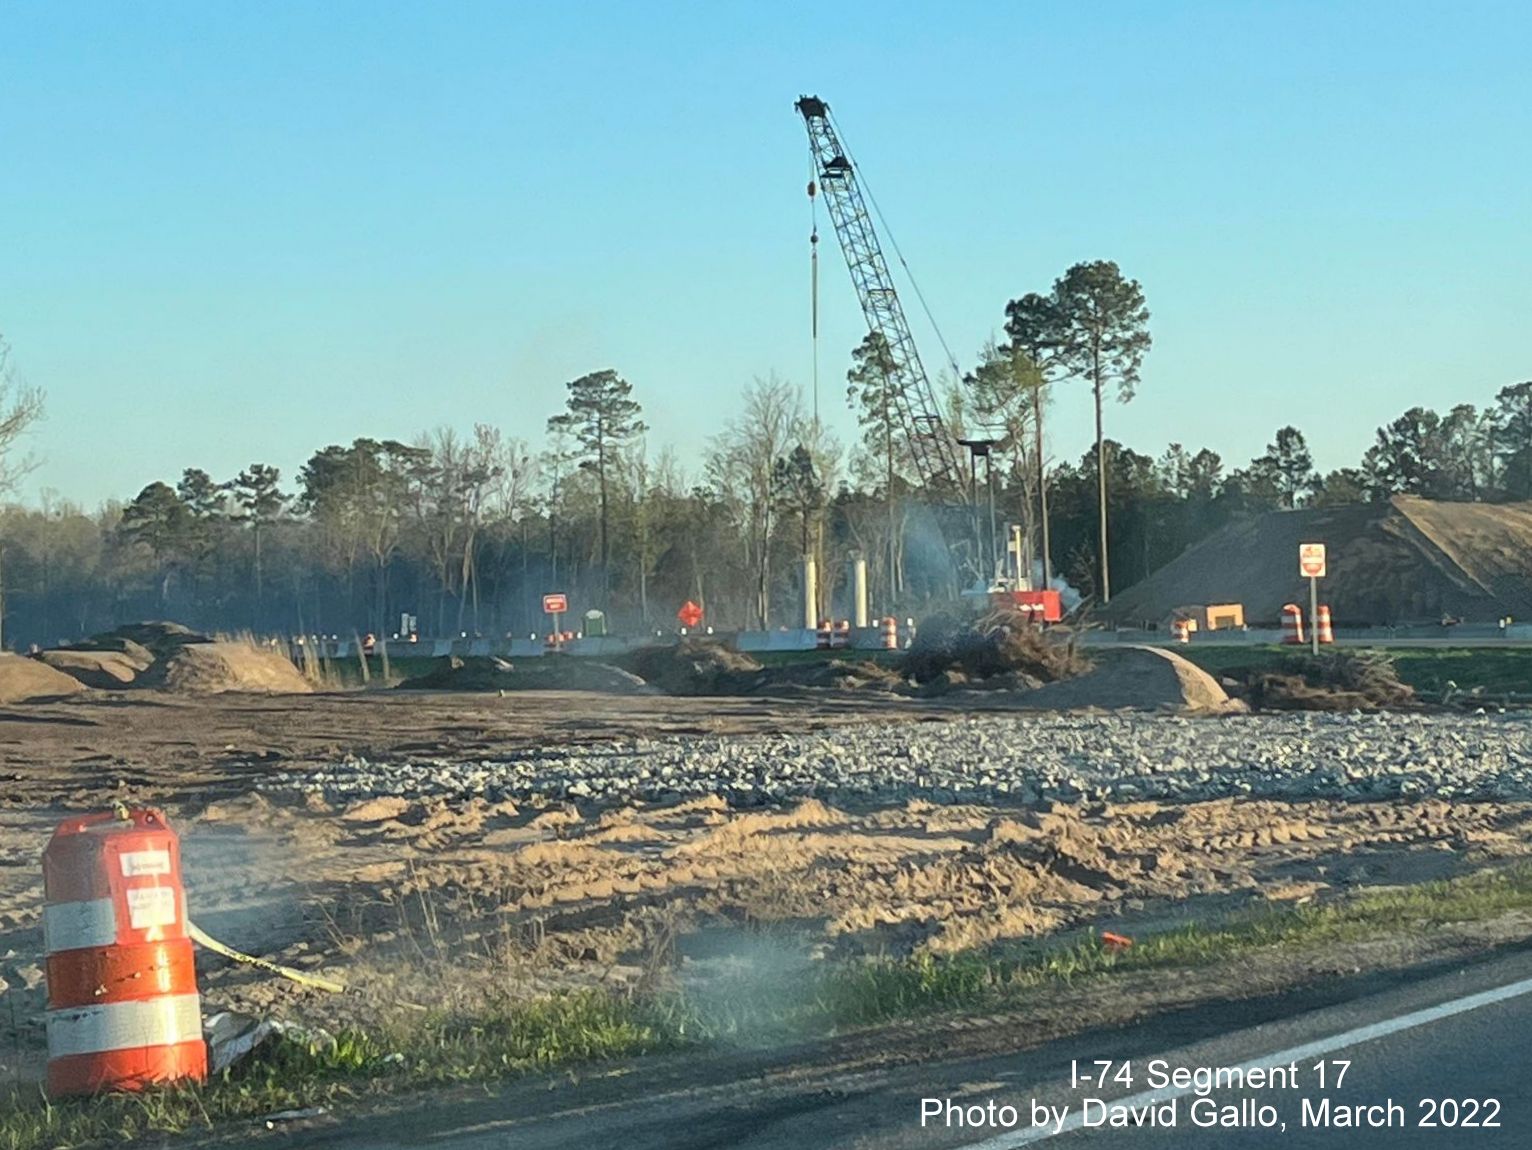 Image from Old Boardman Road of crane helping construct supports for future Boardman interchange bridge 
        on US 74 (Future I-74) West, by David Gallo, March 2022